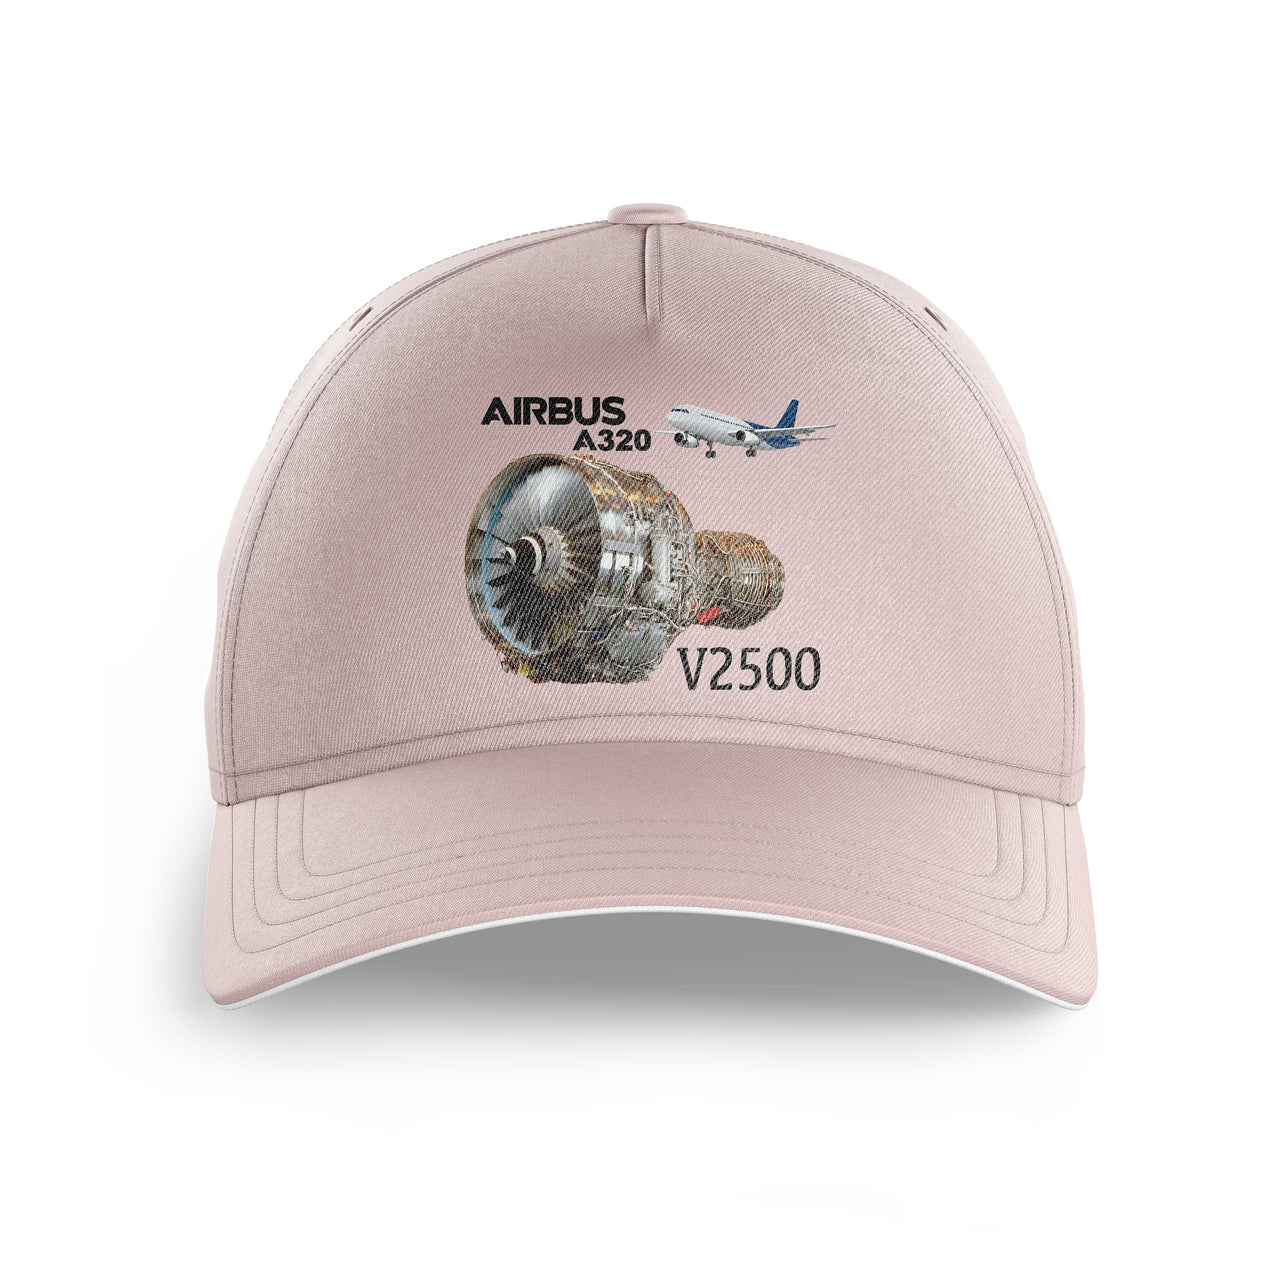 Airbus A320 & V2500 Engine Printed Hats